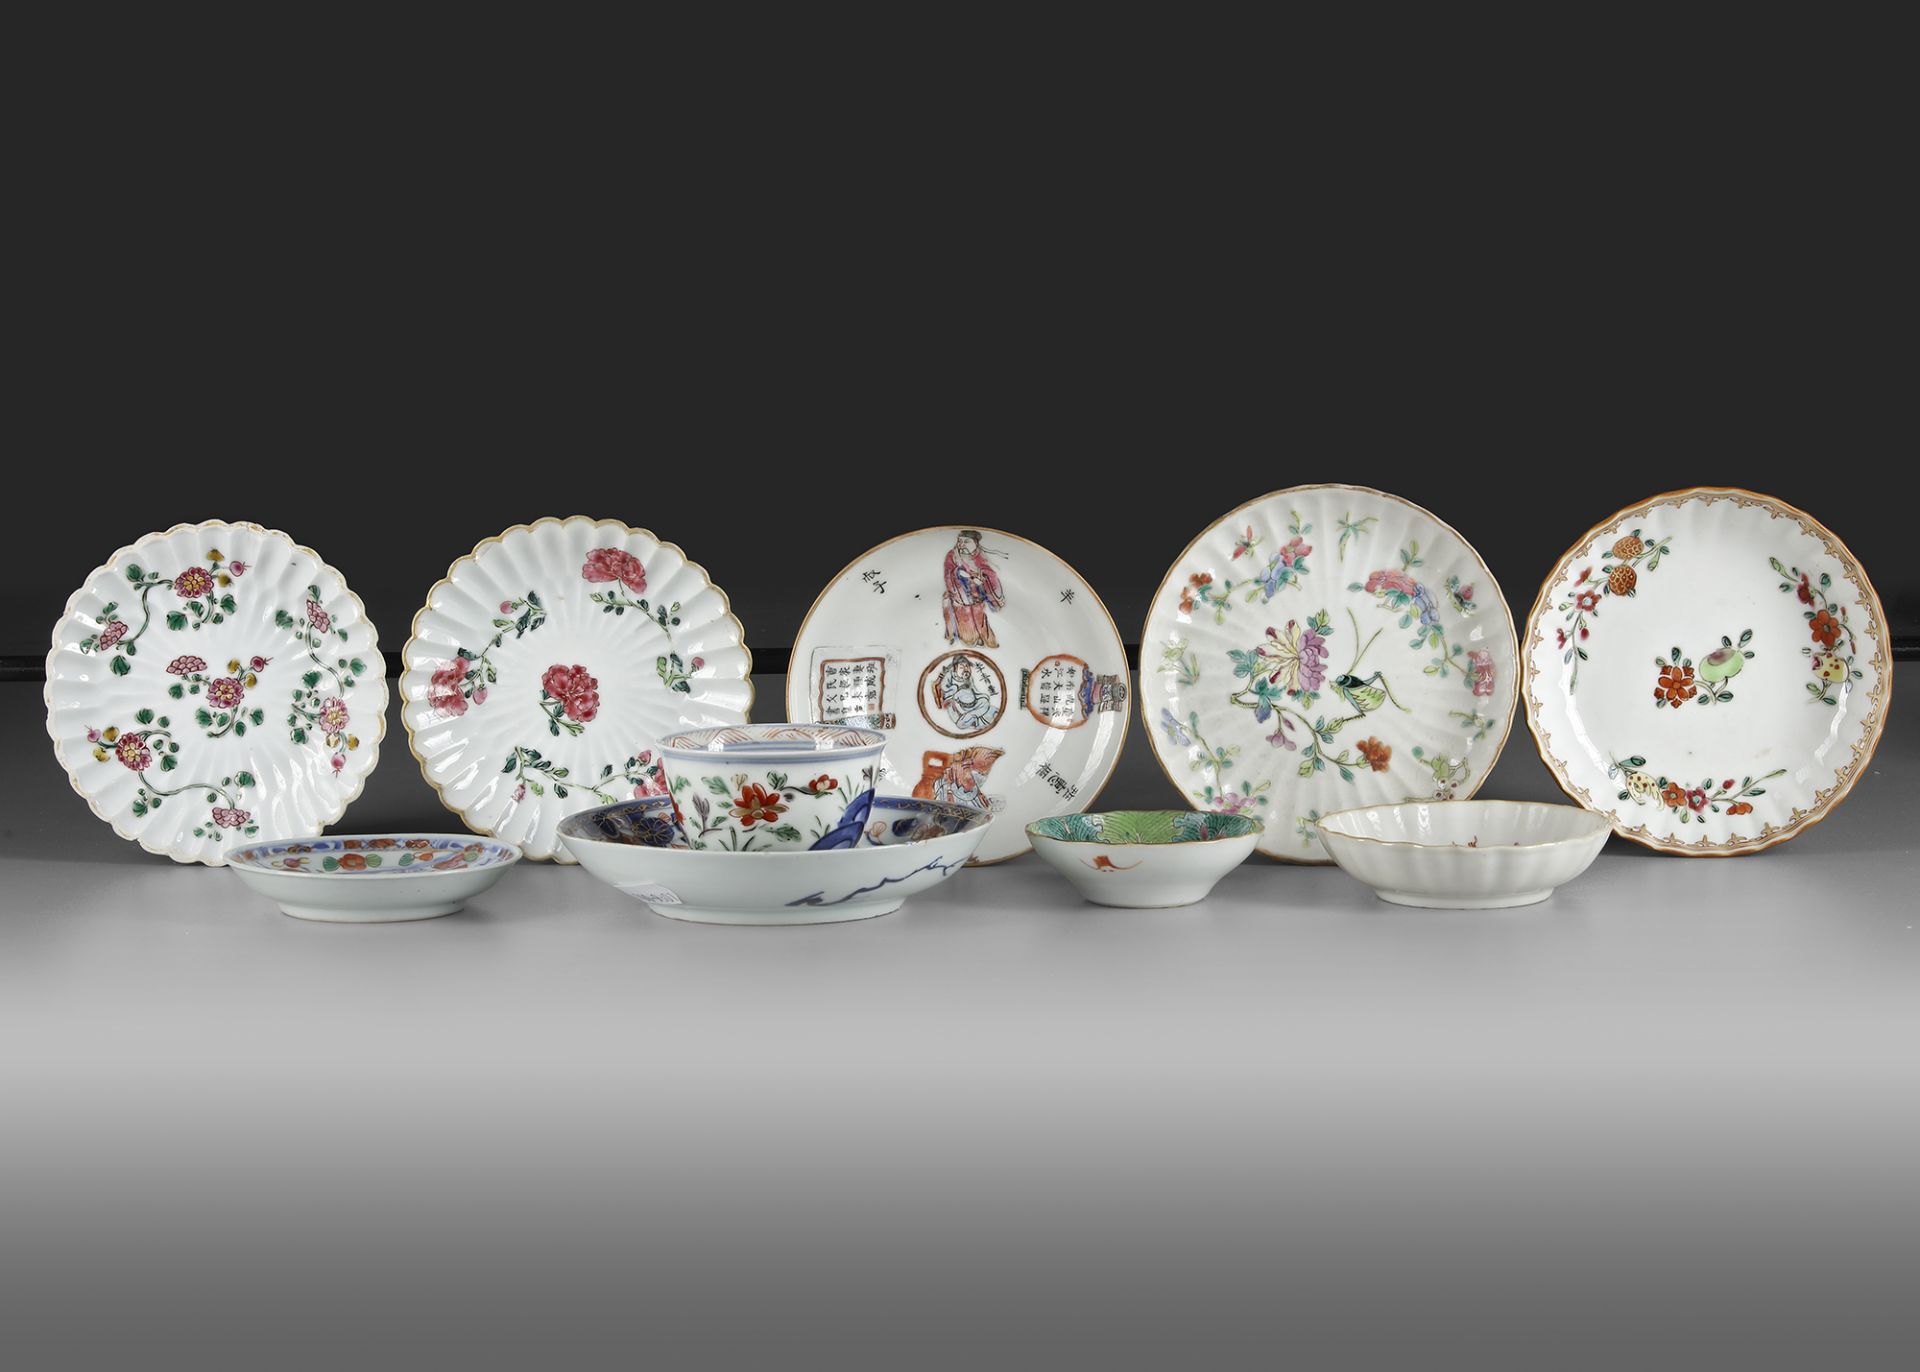 A COLLECTION OF A CUP AND 9 PORCELAIN SAUCERS, 18TH CENTURY AND LATER